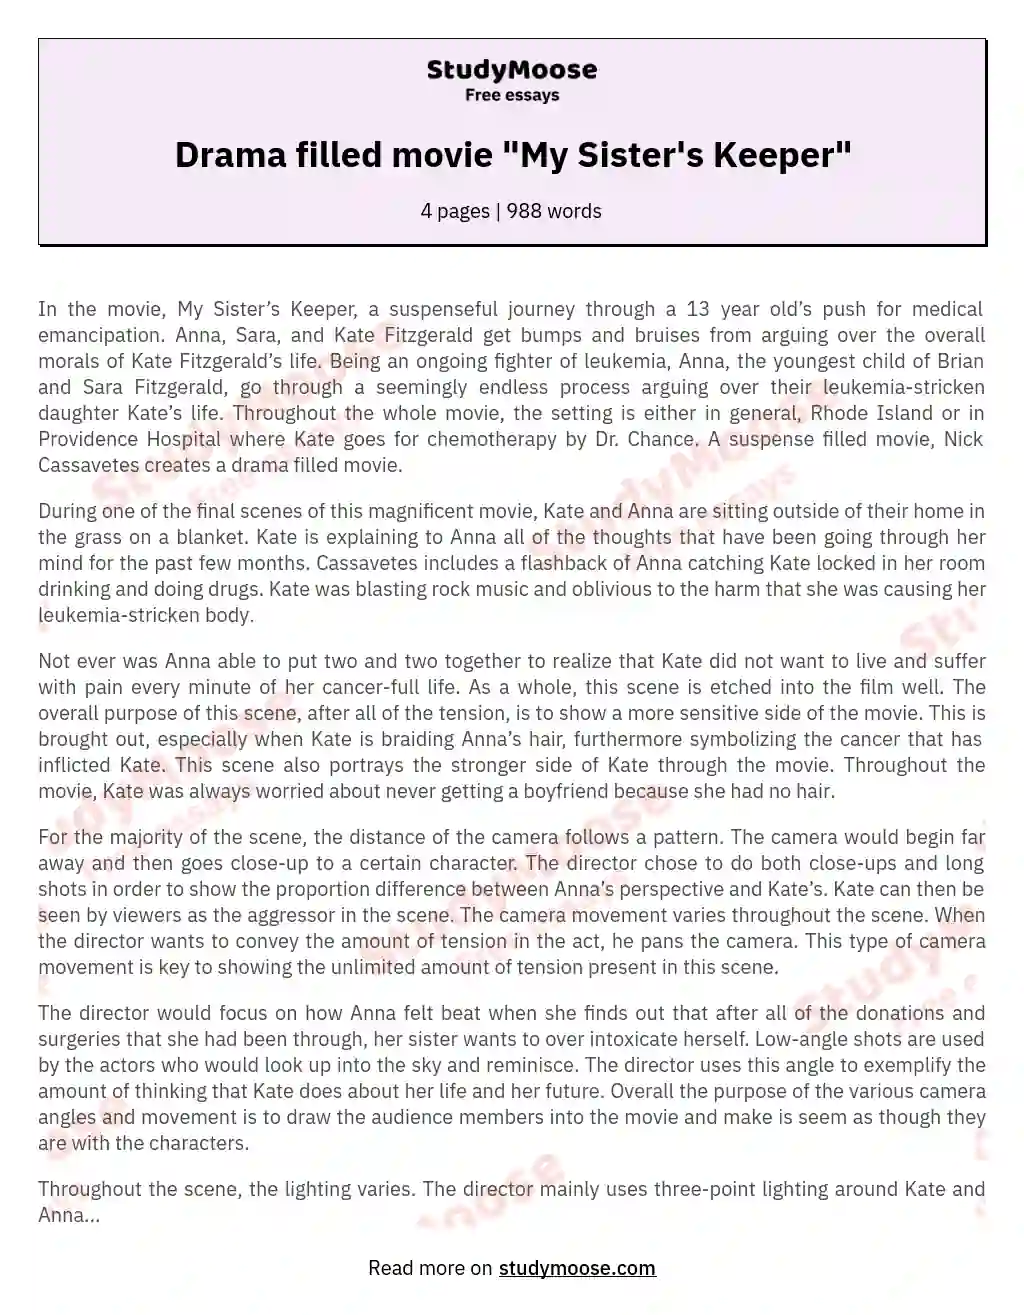 Drama filled movie "My Sister's Keeper" essay